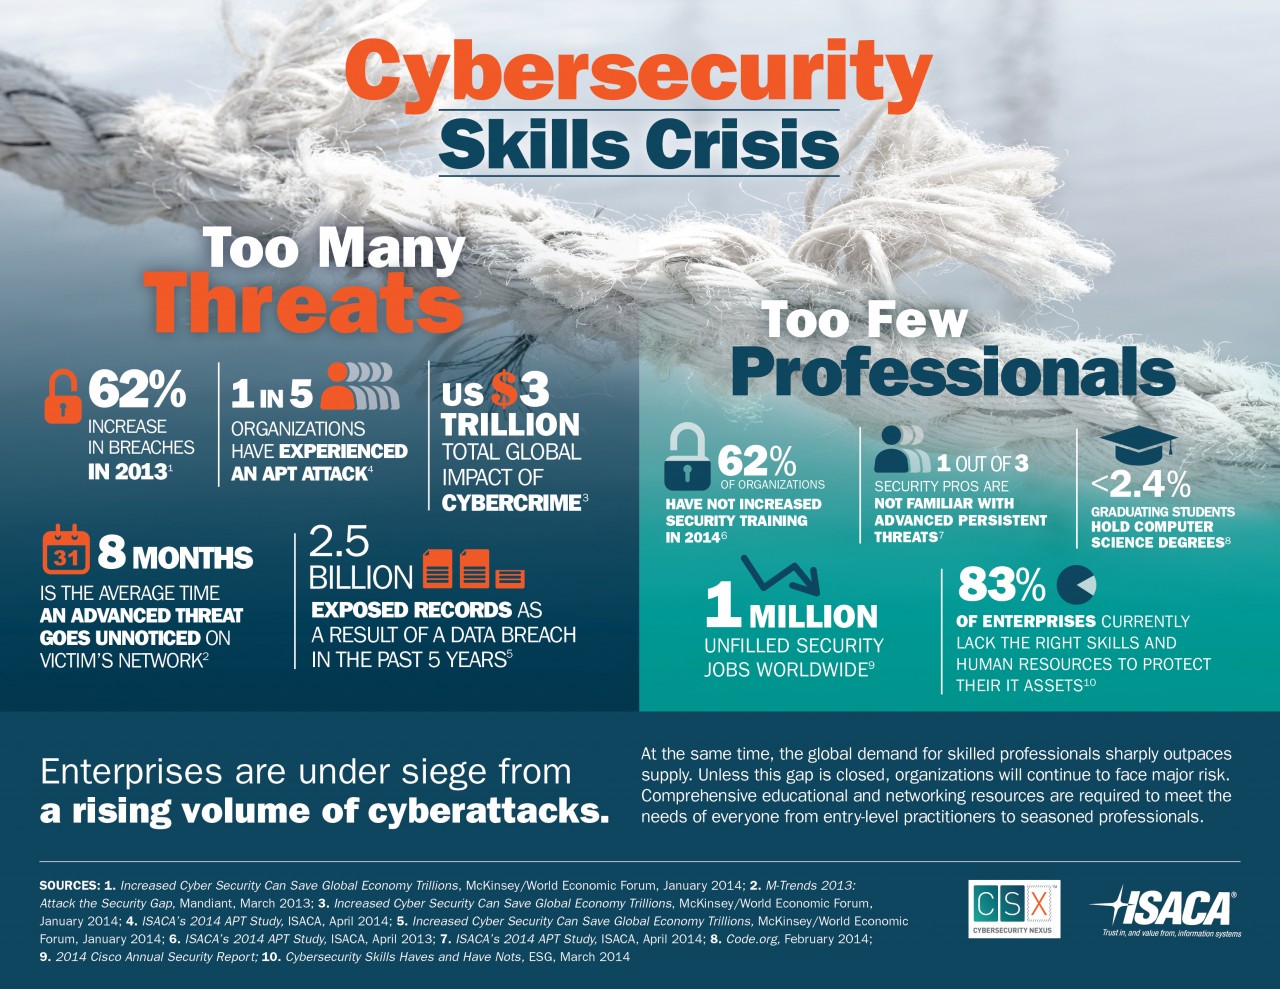 ISACA_Cybersecurity_Infographic-1280x989.jpg